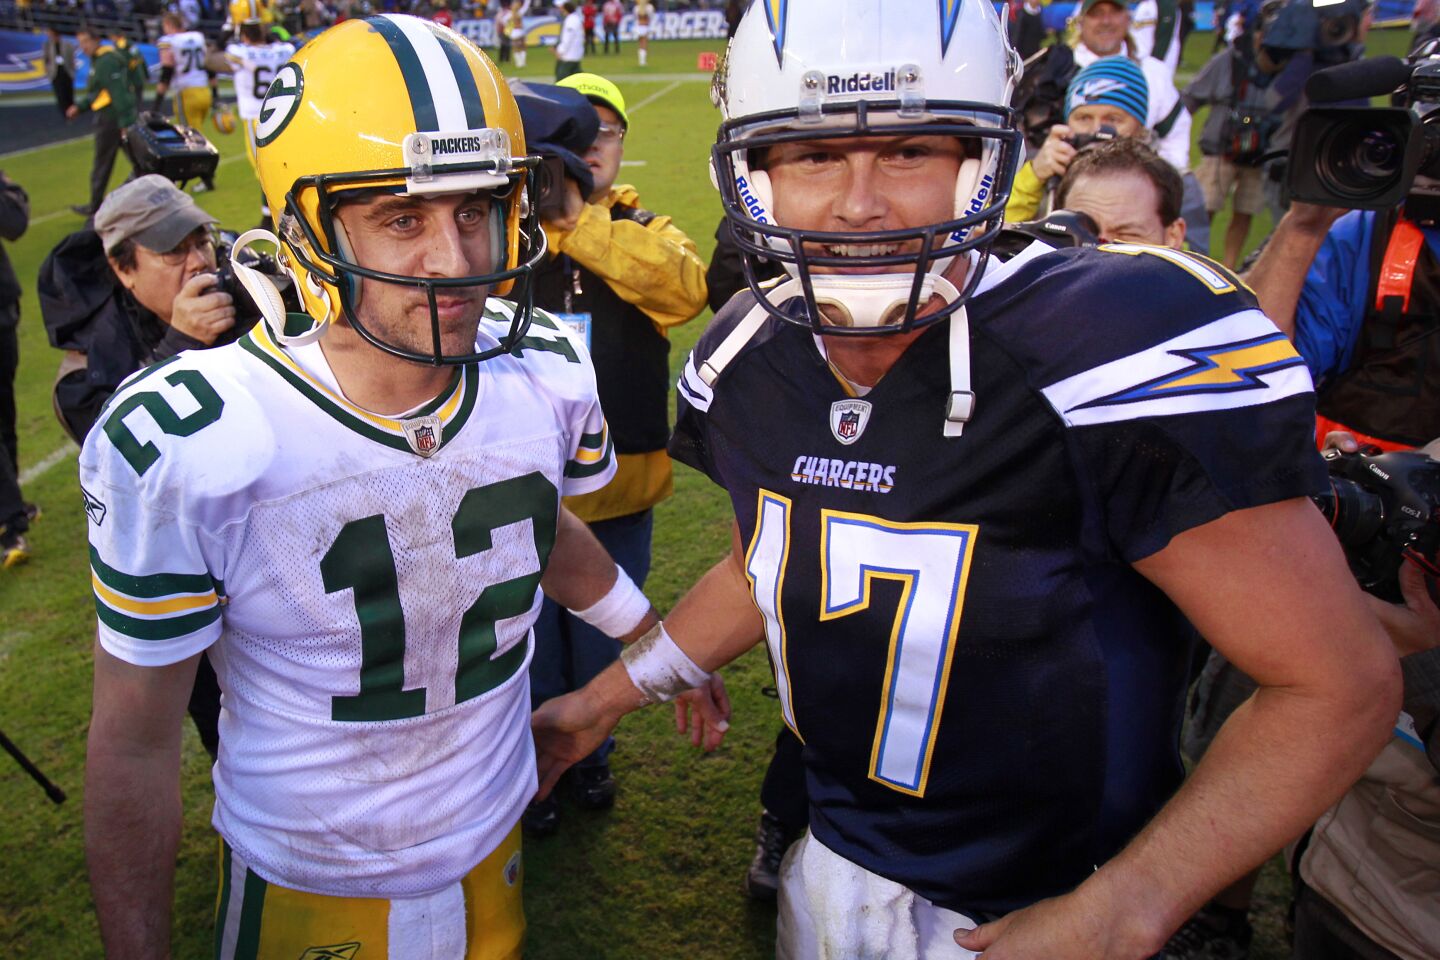 Chargers vs. Packer